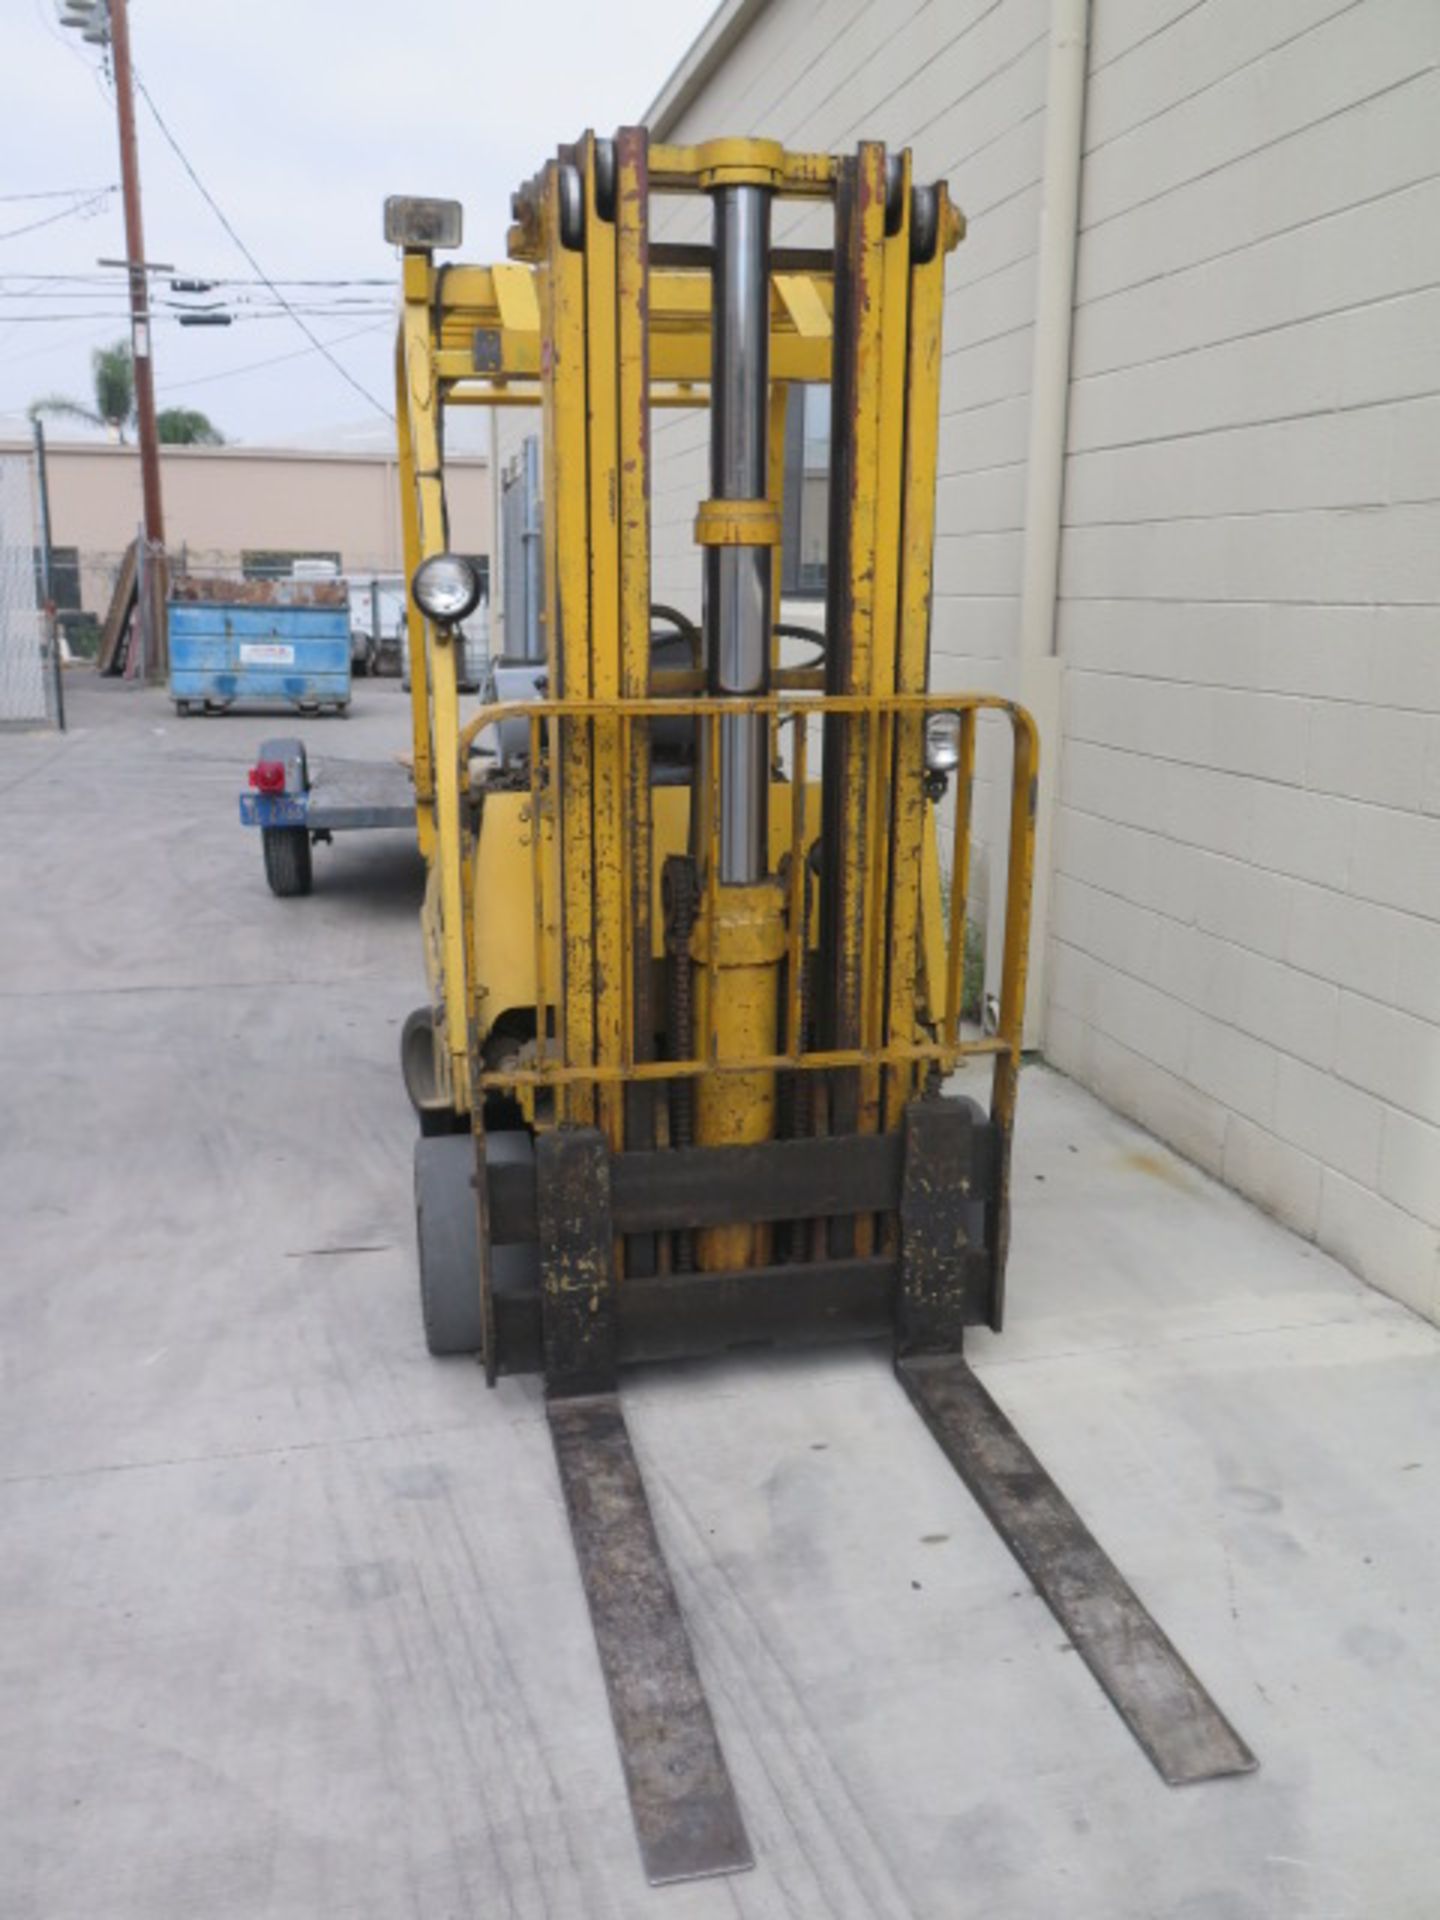 Toyota 02-FGC25 2400 Lb Cap LPG Forklift s/n 02-FGC25-10908 w/ 3-Stage Mast, 185” Lift Height, - Image 2 of 7